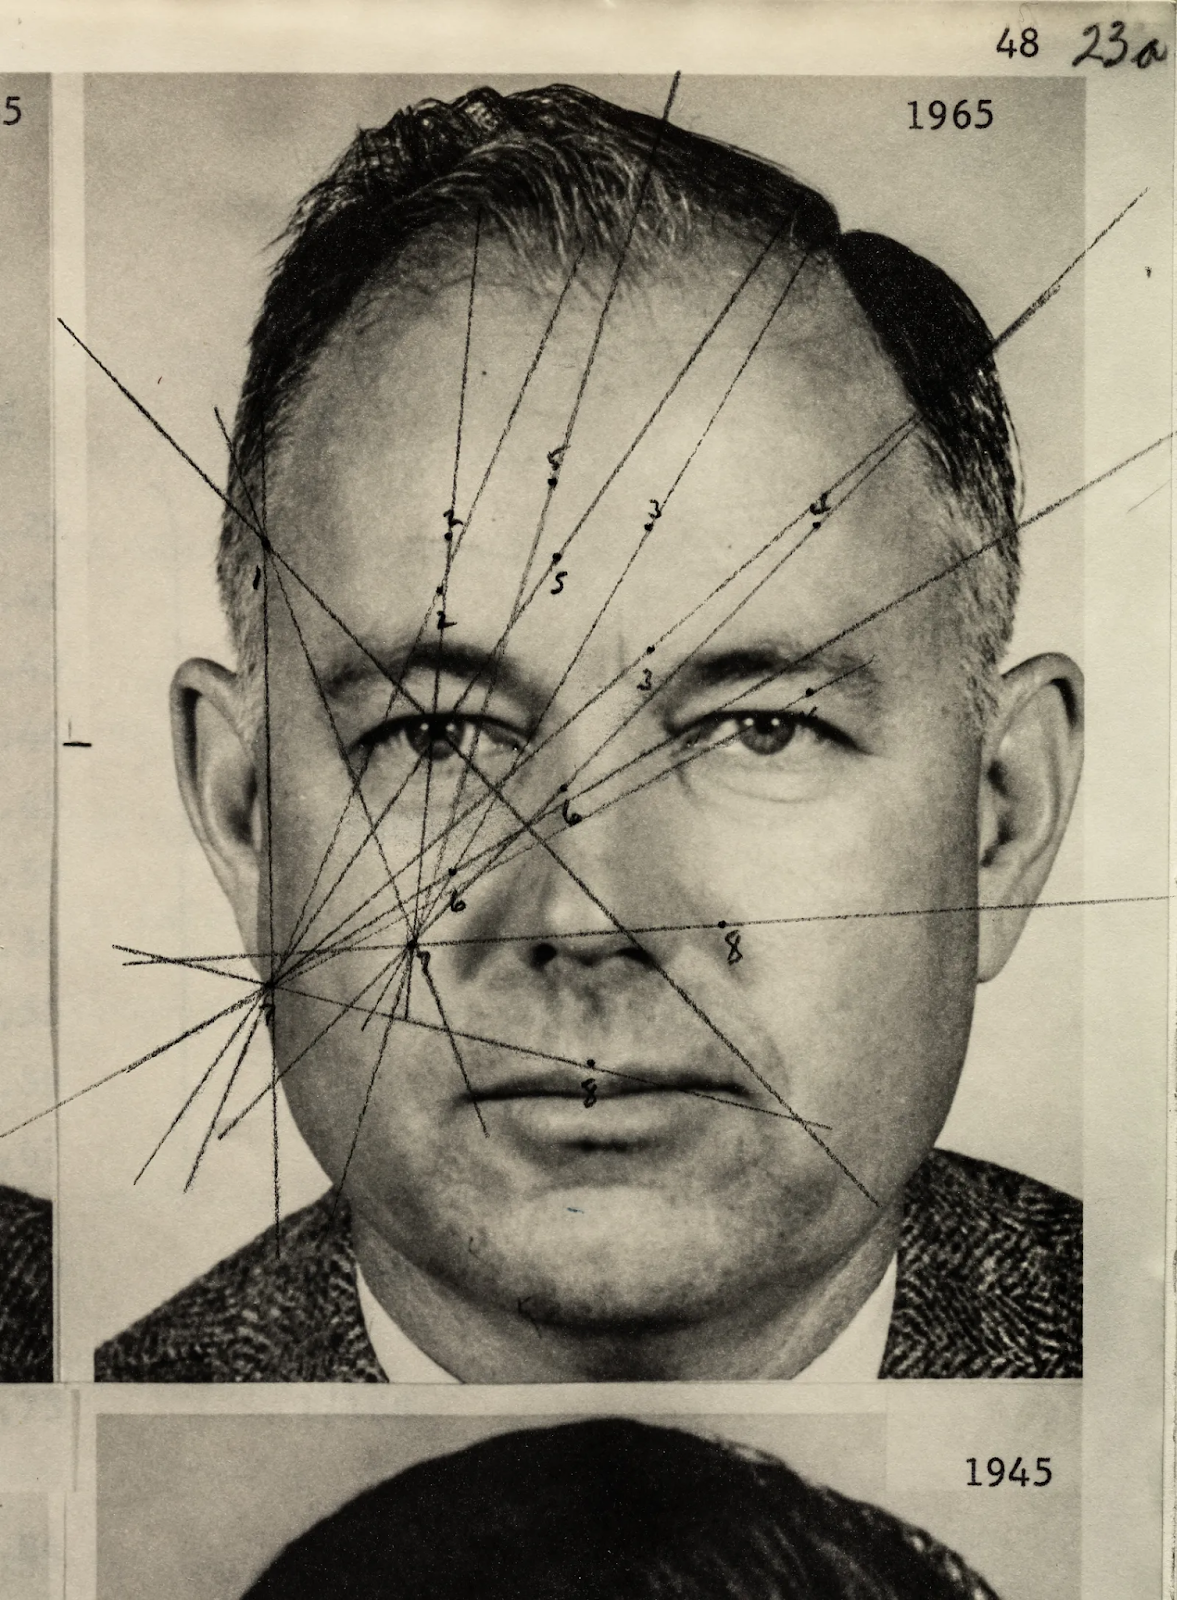 Woody Bledsoe, via [Wired](https://www.wired.com/story/secret-history-facial-recognition/).